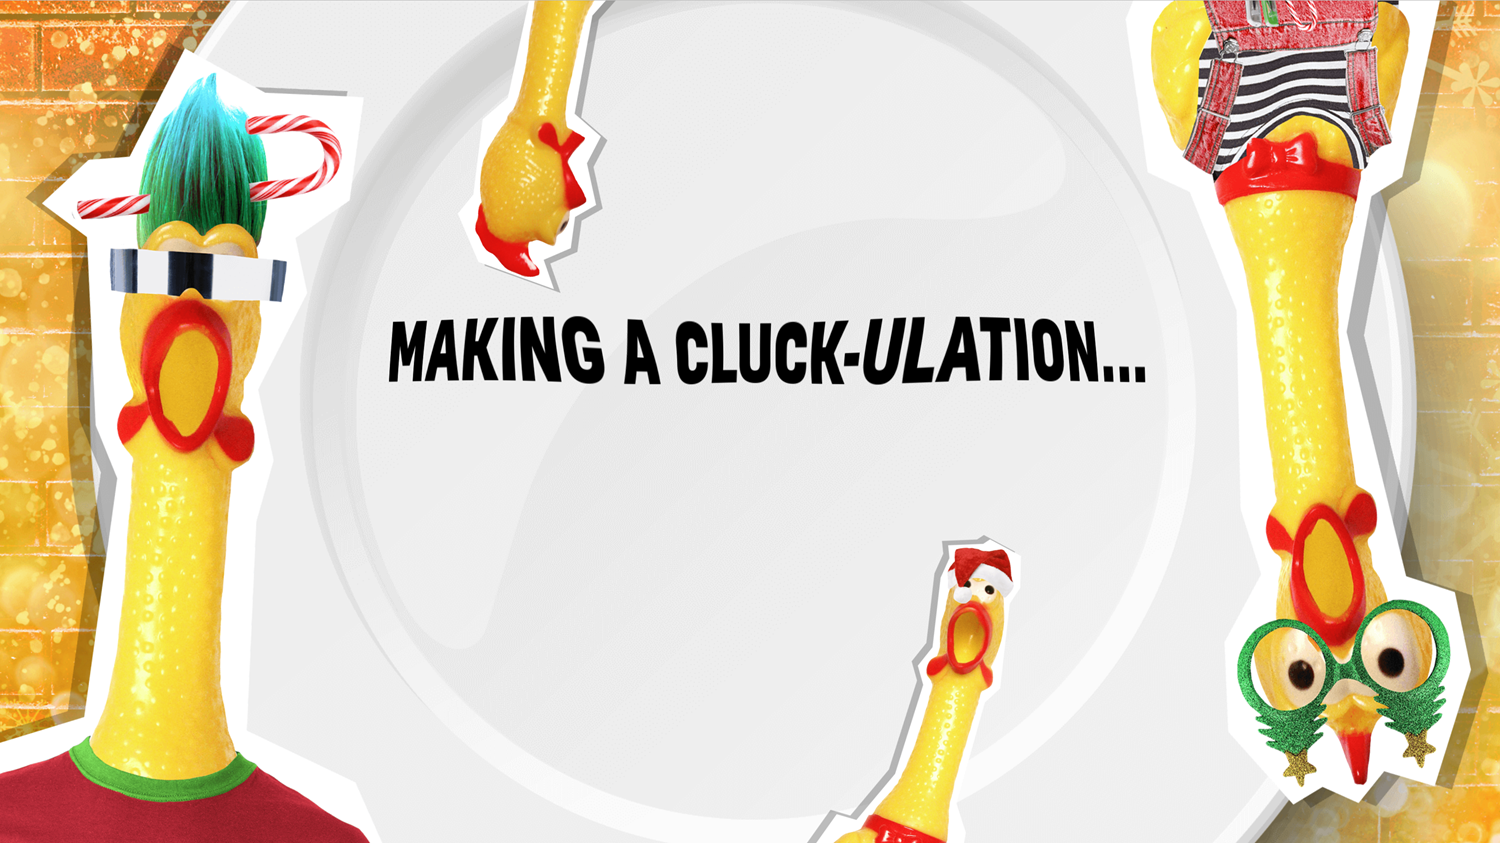 What's Your Chicken Name Game Making a Cluck-ulation Screen Screenshot.